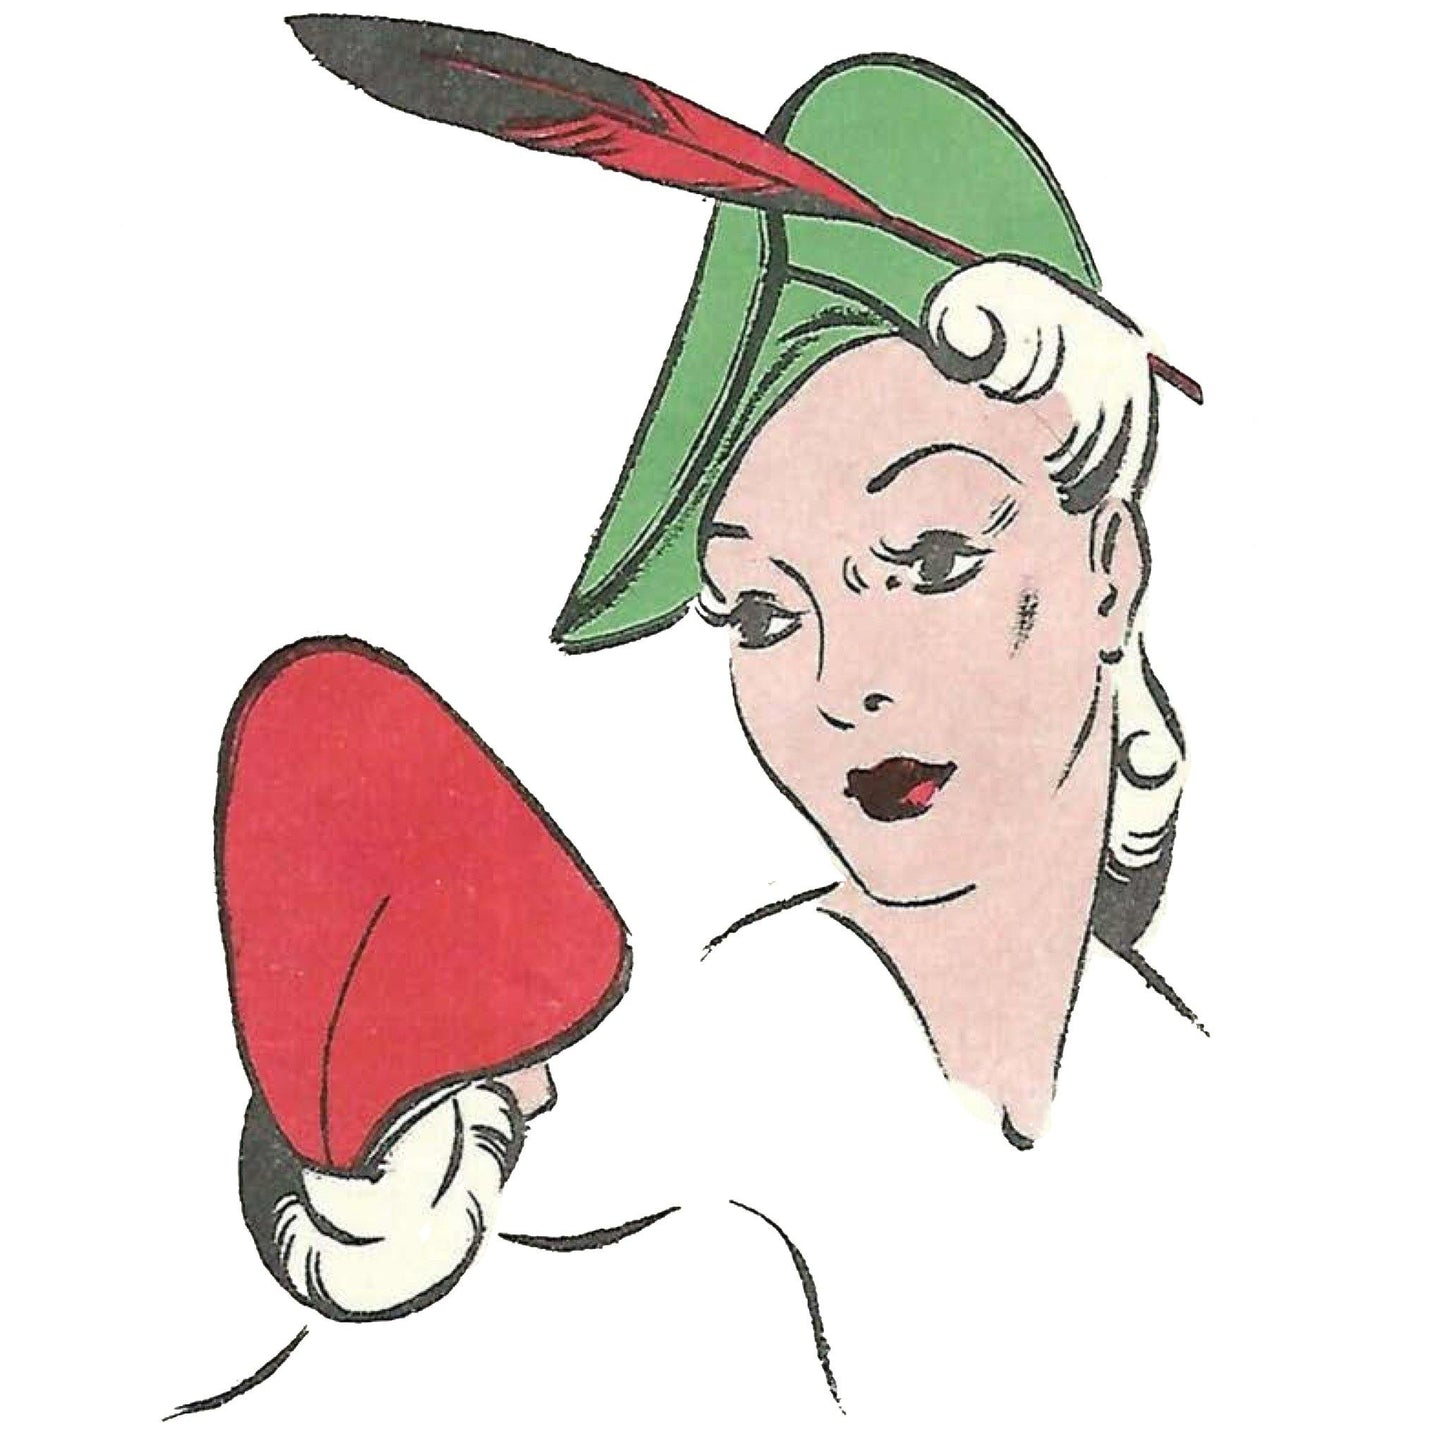 Women wearing 'Elegant Hat' showing the front and back of the hat.